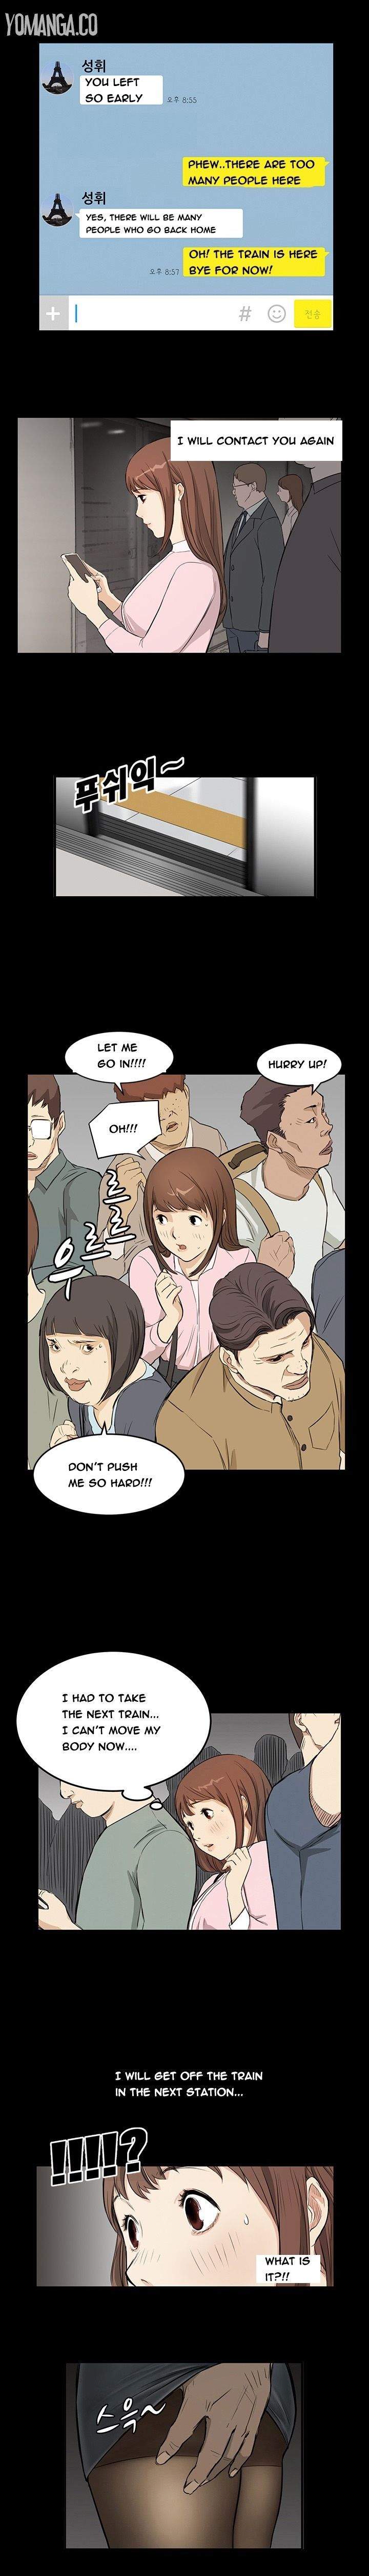 Si-Eun - Chapter 3 Page 9